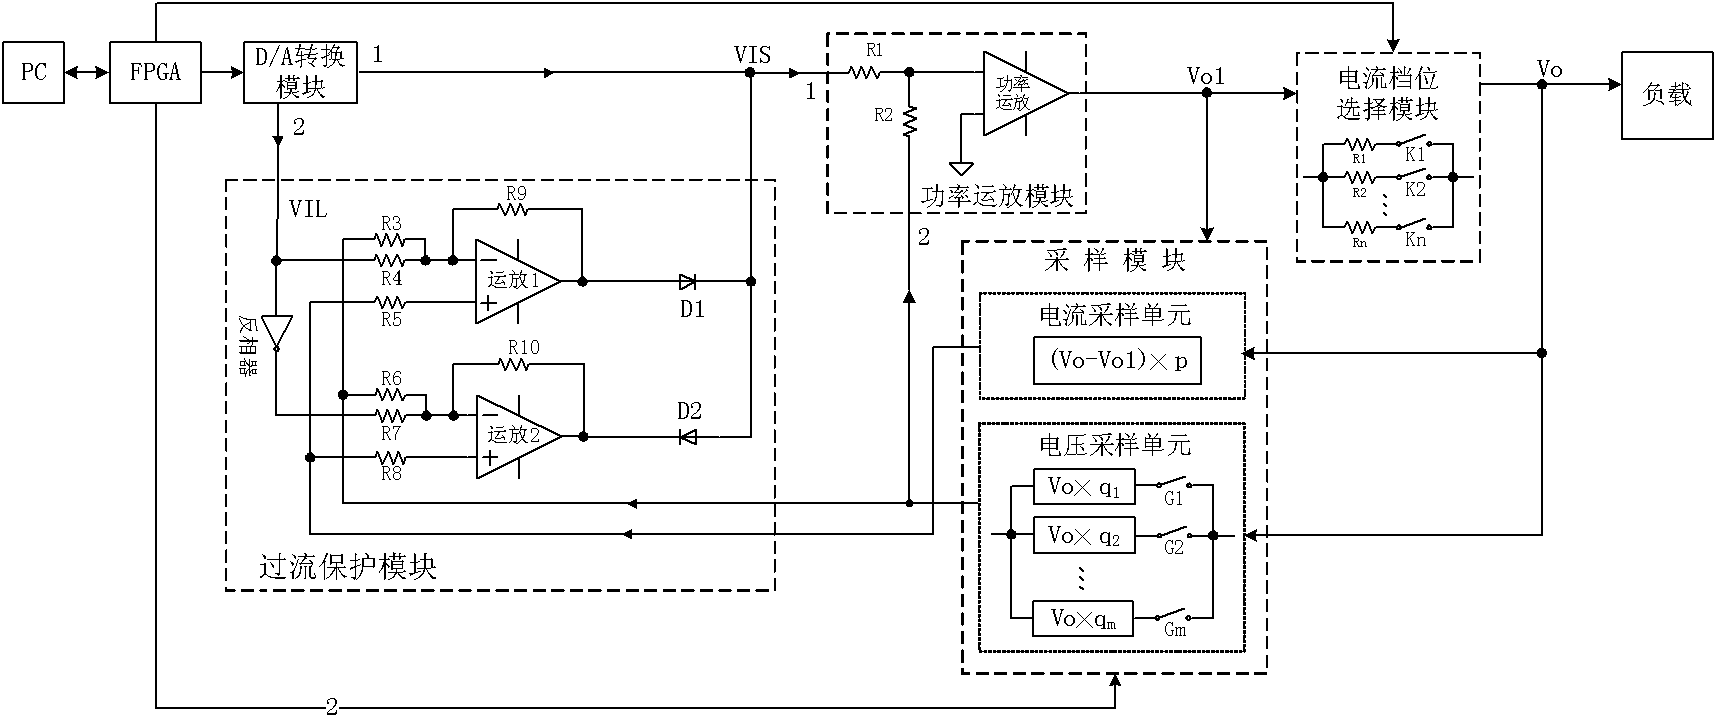 Numerical-control direct-current power source